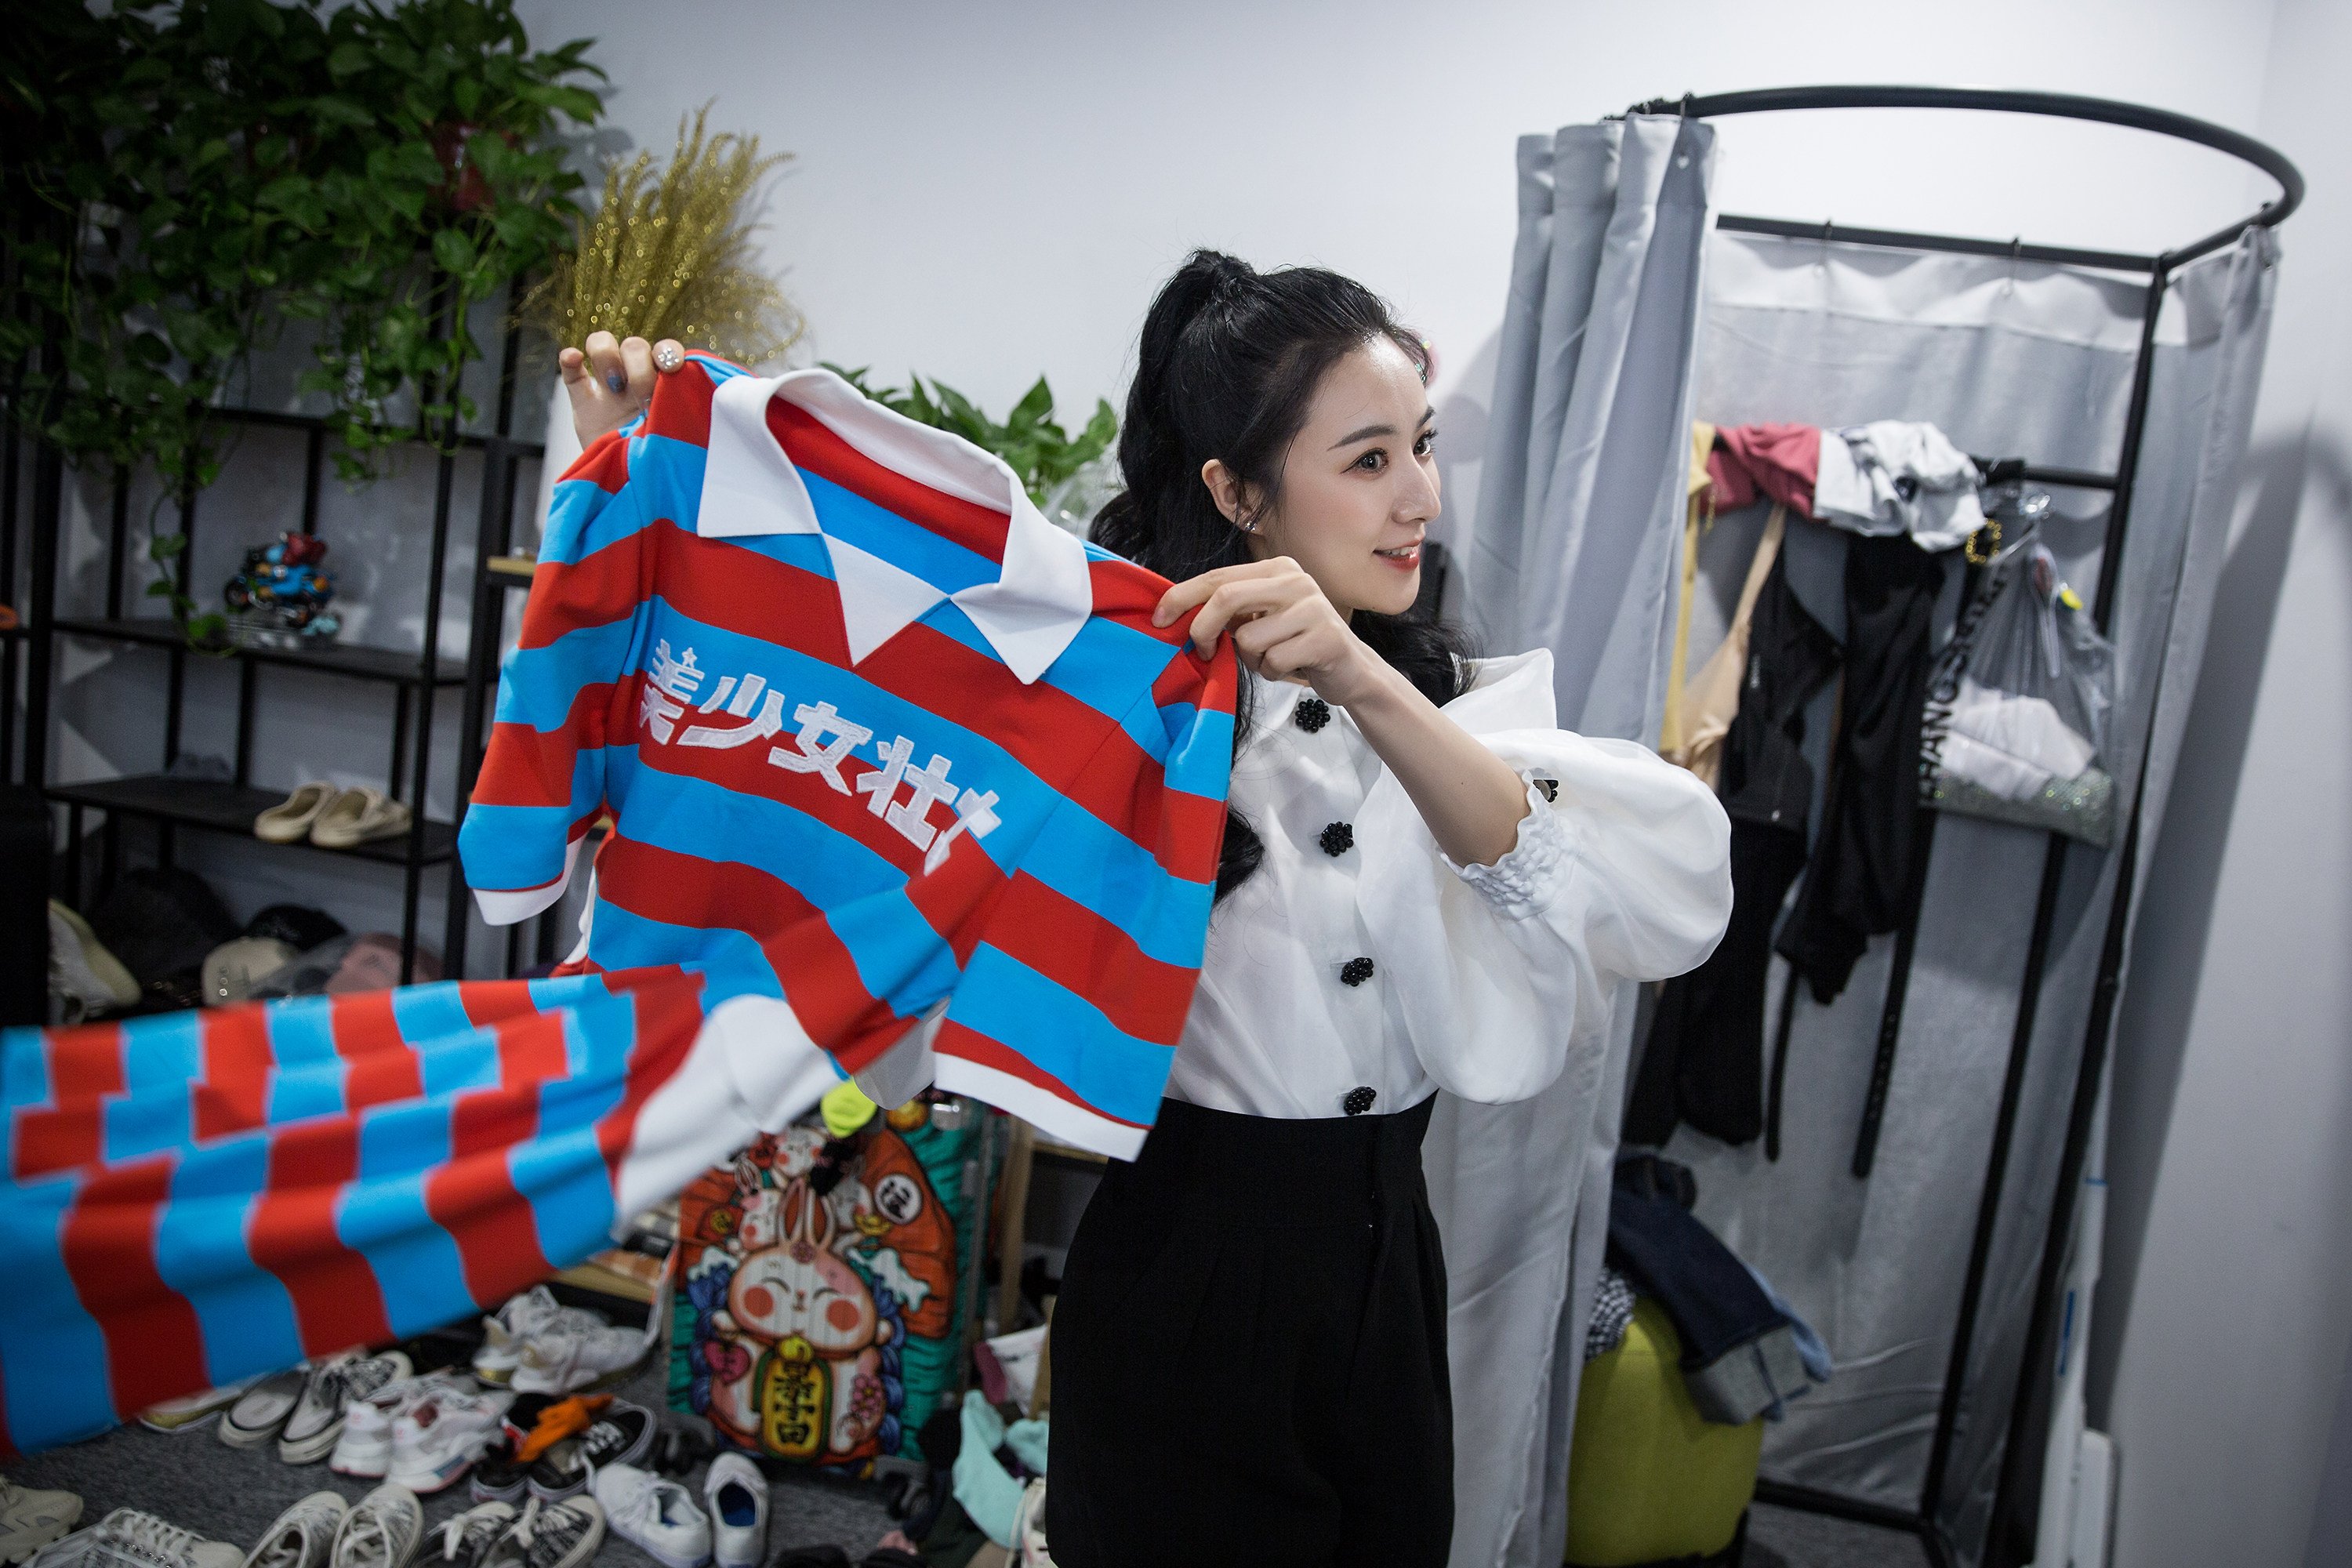 Chinese online influencer Viya went from being the country’s most bankable live-streaming e-commerce star to a virtual pariah overnight after her tax penalty was announced by authorities. Photo: VCG via Getty Images